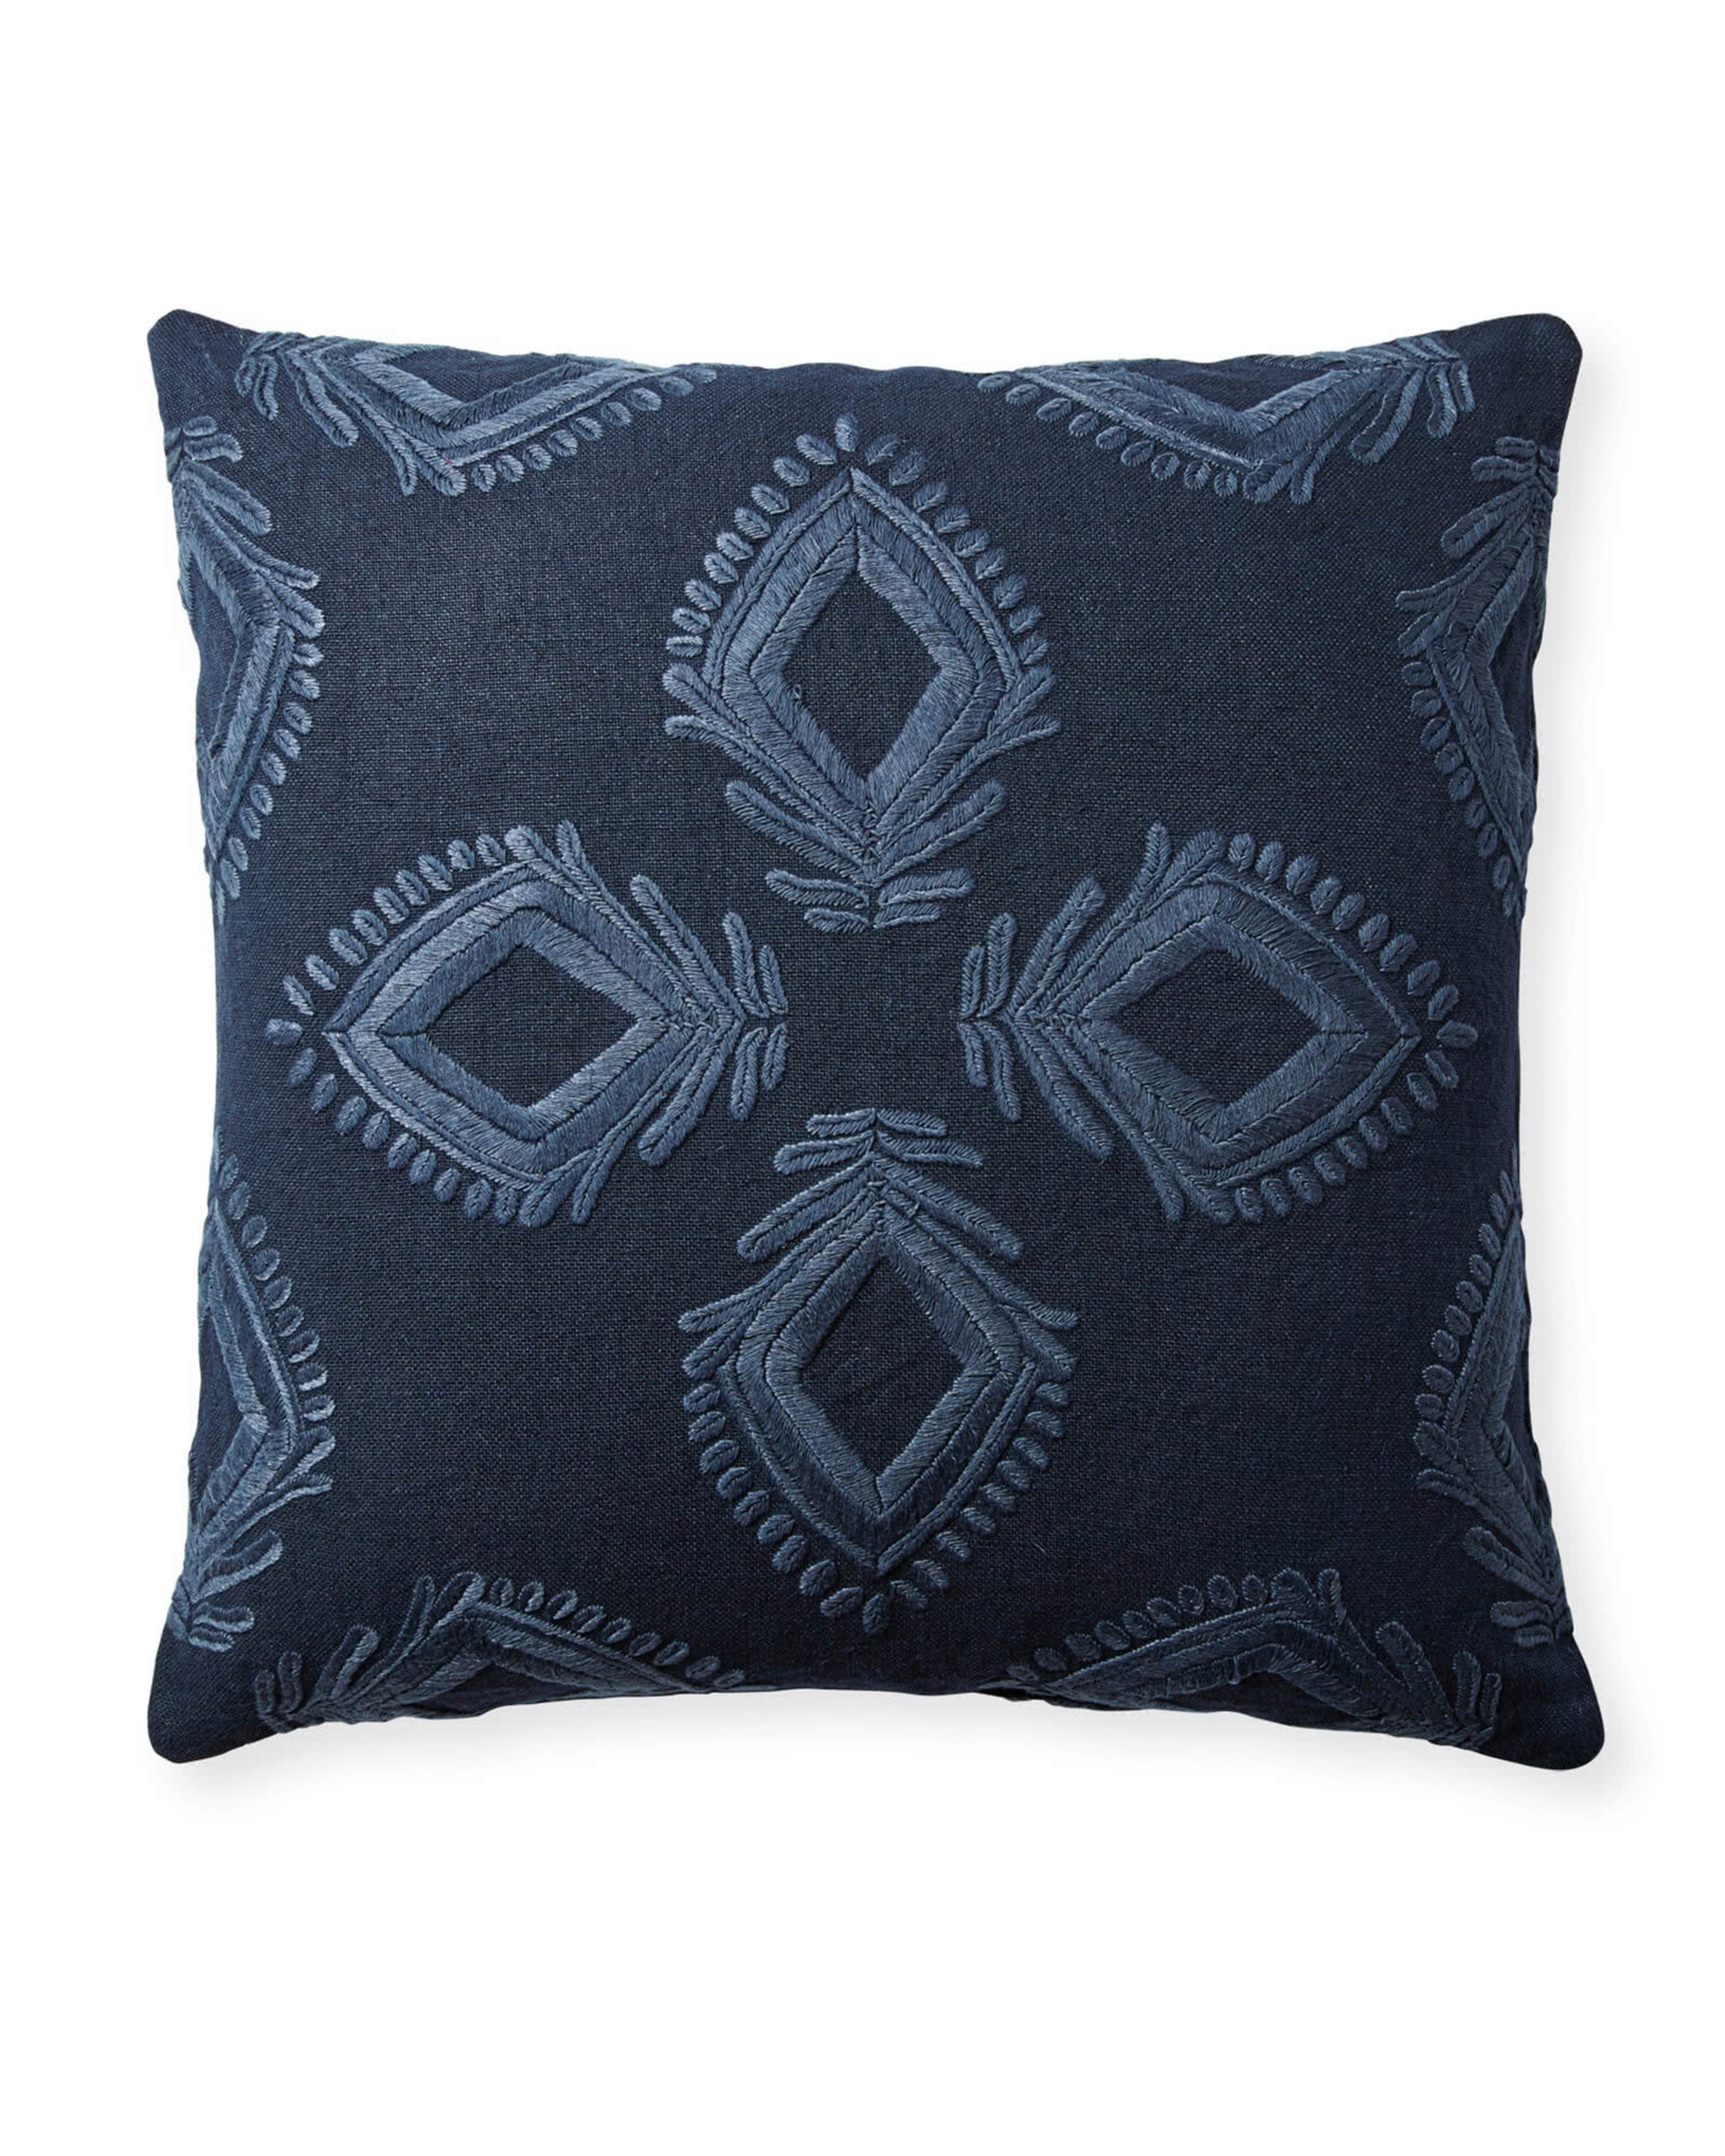 Leighton Pillow Cover - Serena and Lily